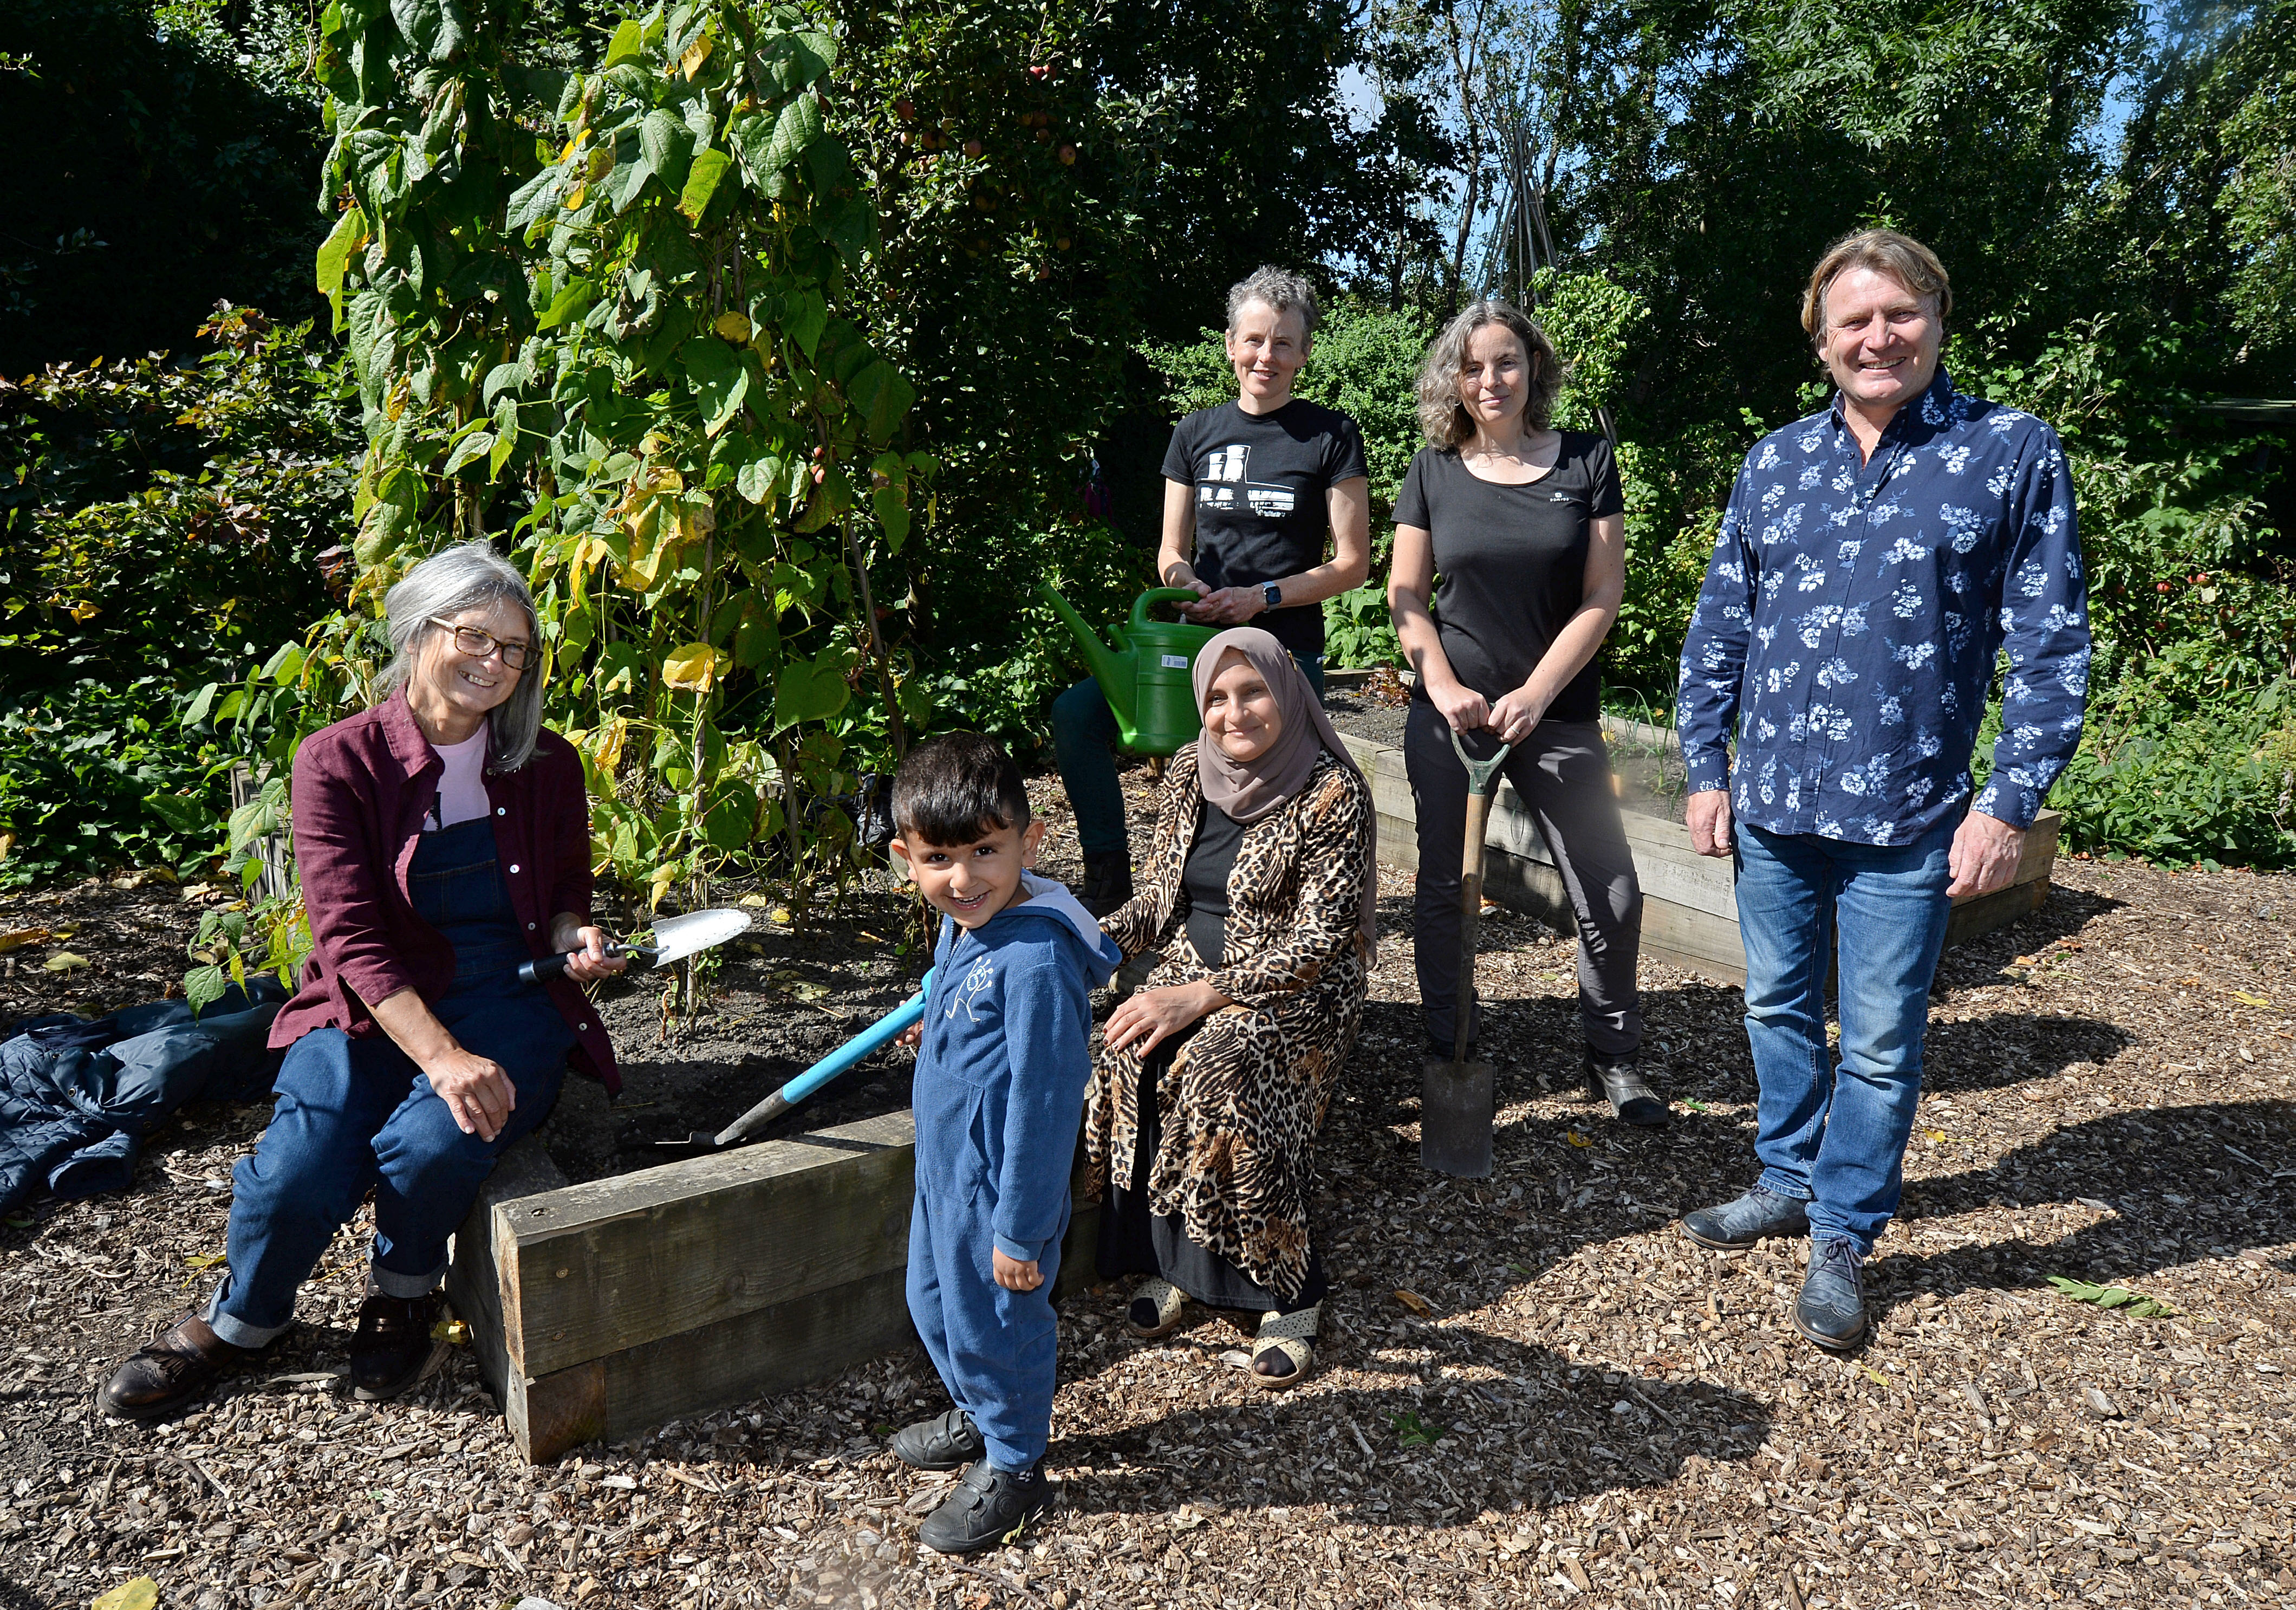 Gardener David Domoney with (L to R): Sheila Sutherland, Ravyer Osman, Rezan Mohamed, Jess Banham and Jacqui Dace at the Tinsley Community Allotment in Sheffield, South Yorkshire, which has won a 'Cultivation Street' award - a competition run by celebrity gardener, David Domoney.